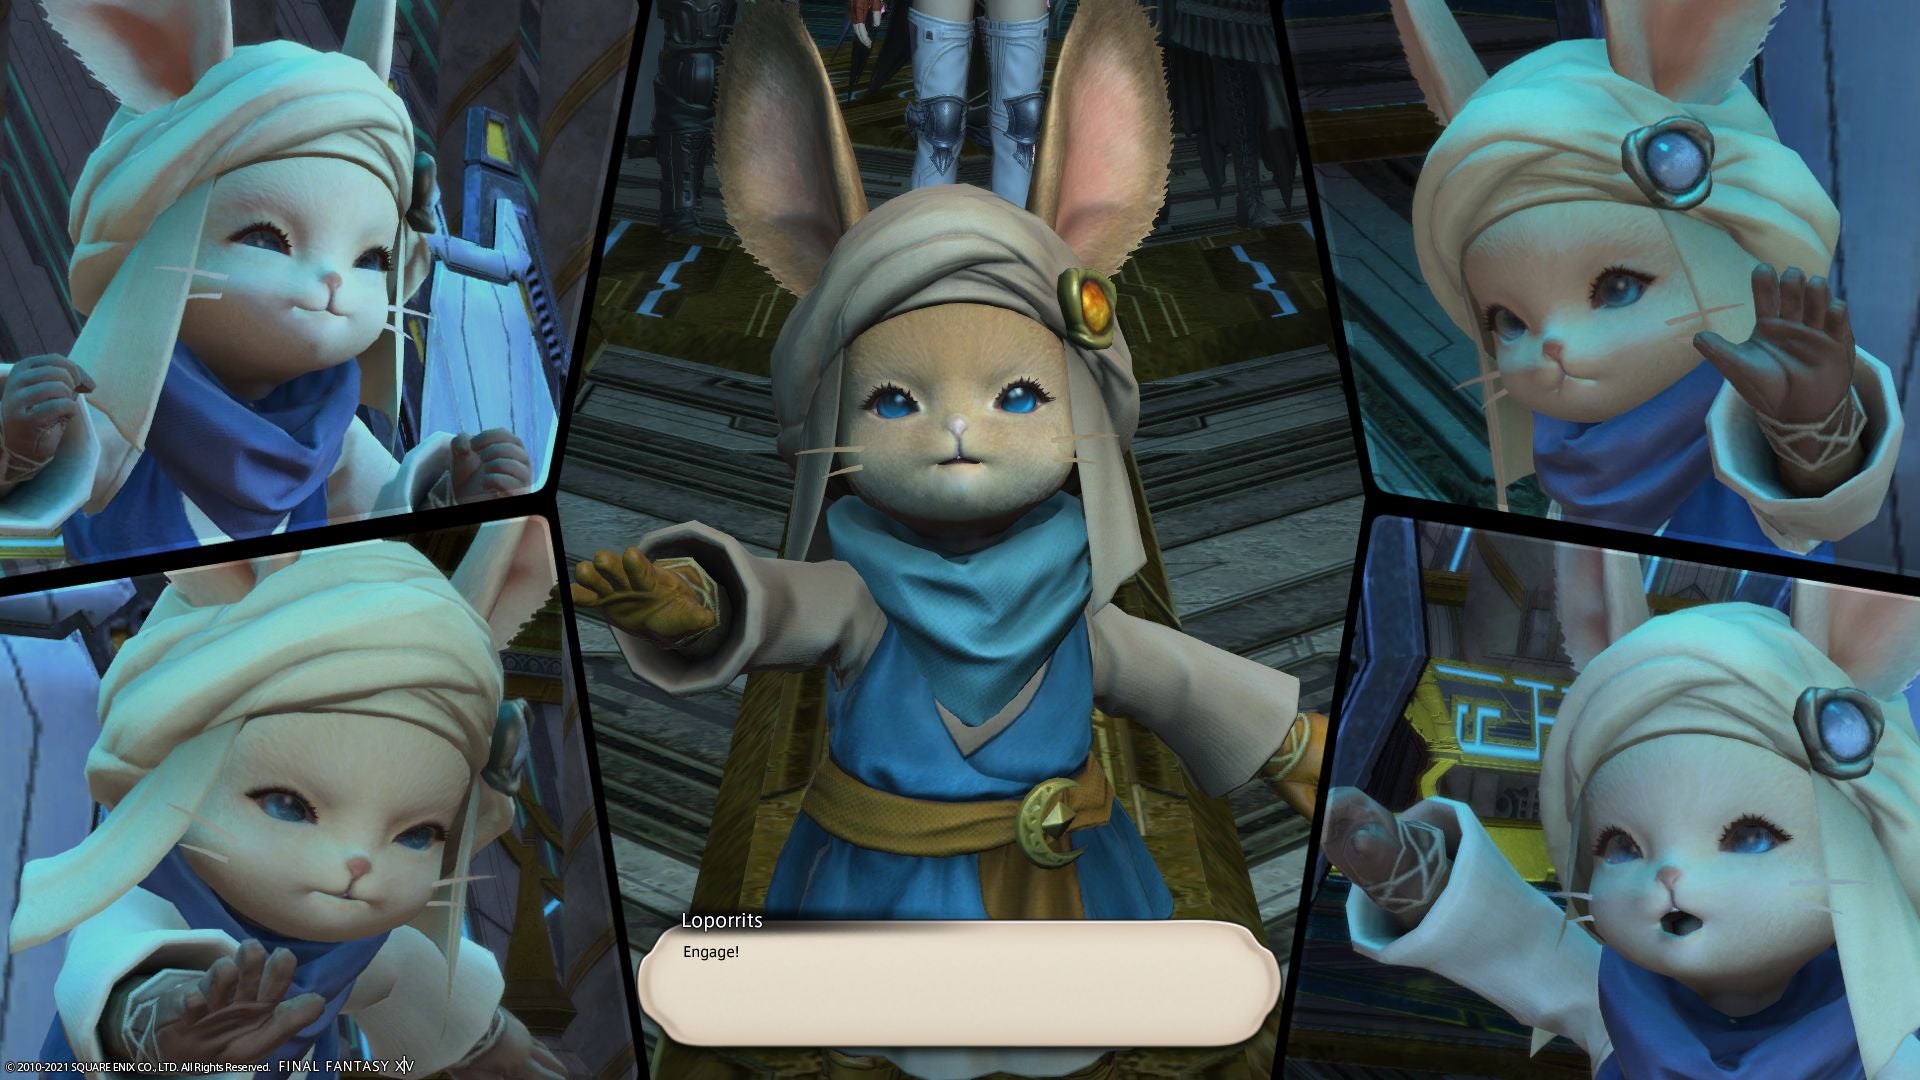 Final Fantasy 14 - A bunny creature called Loporrits says "Engage!"